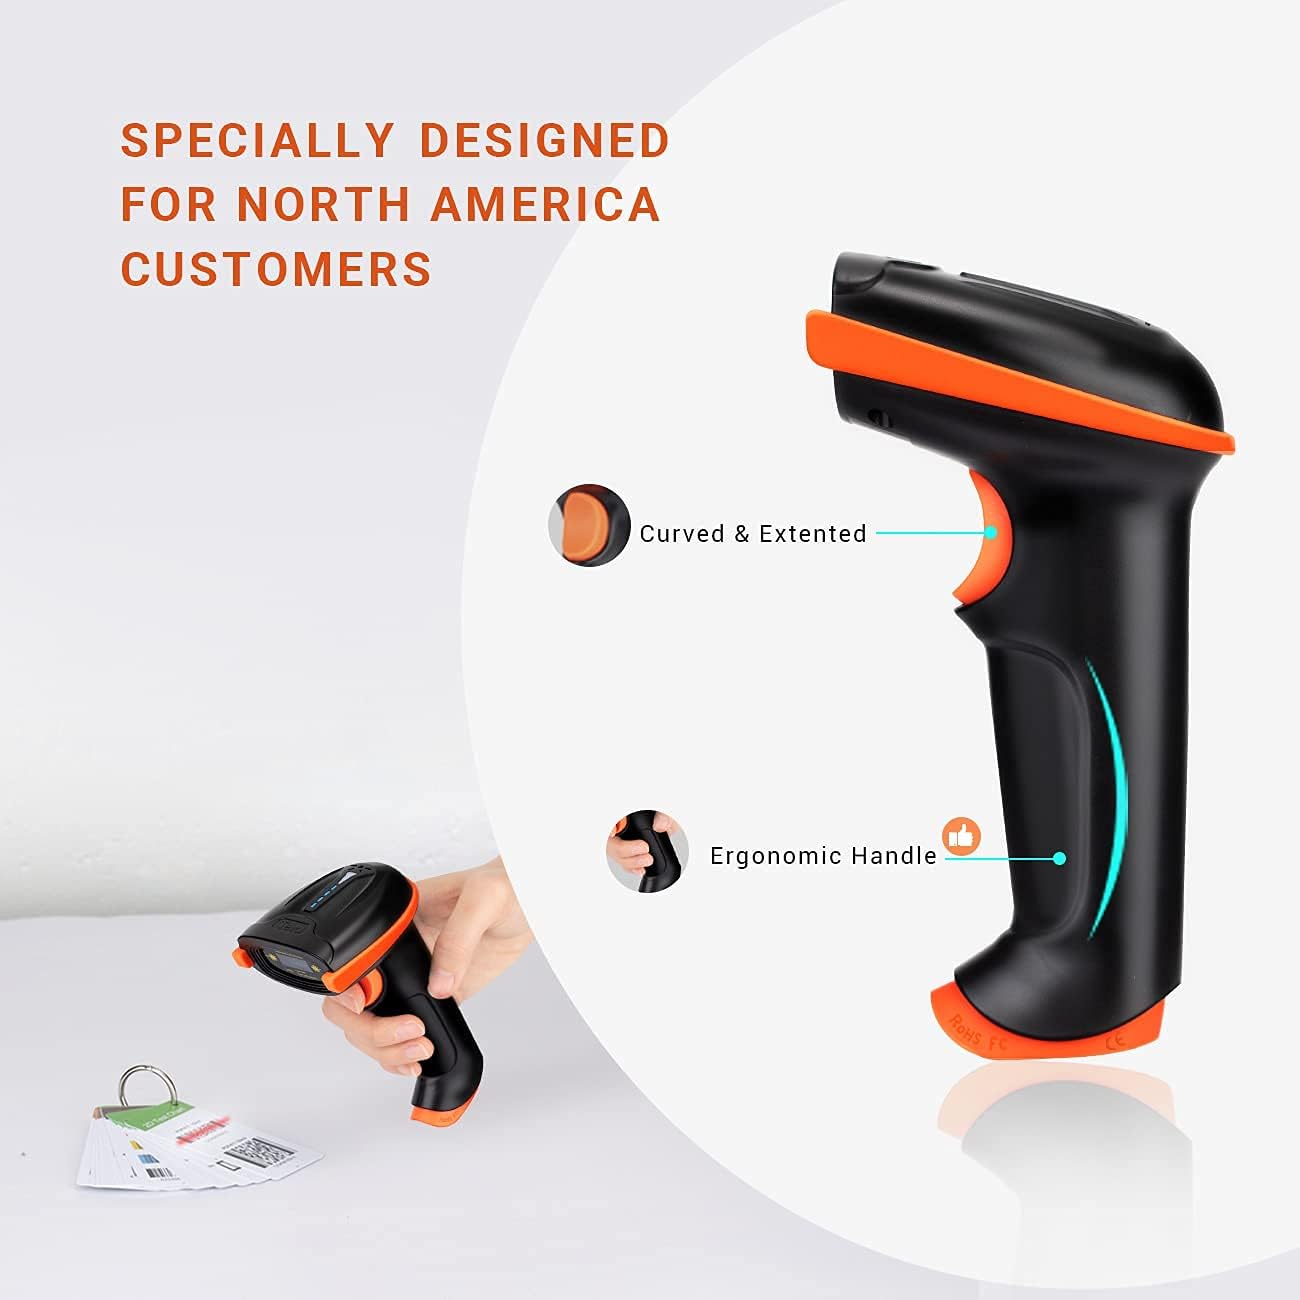 Tera Barcode Scanner Wireless 1D Laser Cordless Barcode Reader with Battery Level Indicator, Versatile 2 in 1 2.4Ghz Wireless and USB 2.0 Wired-7851